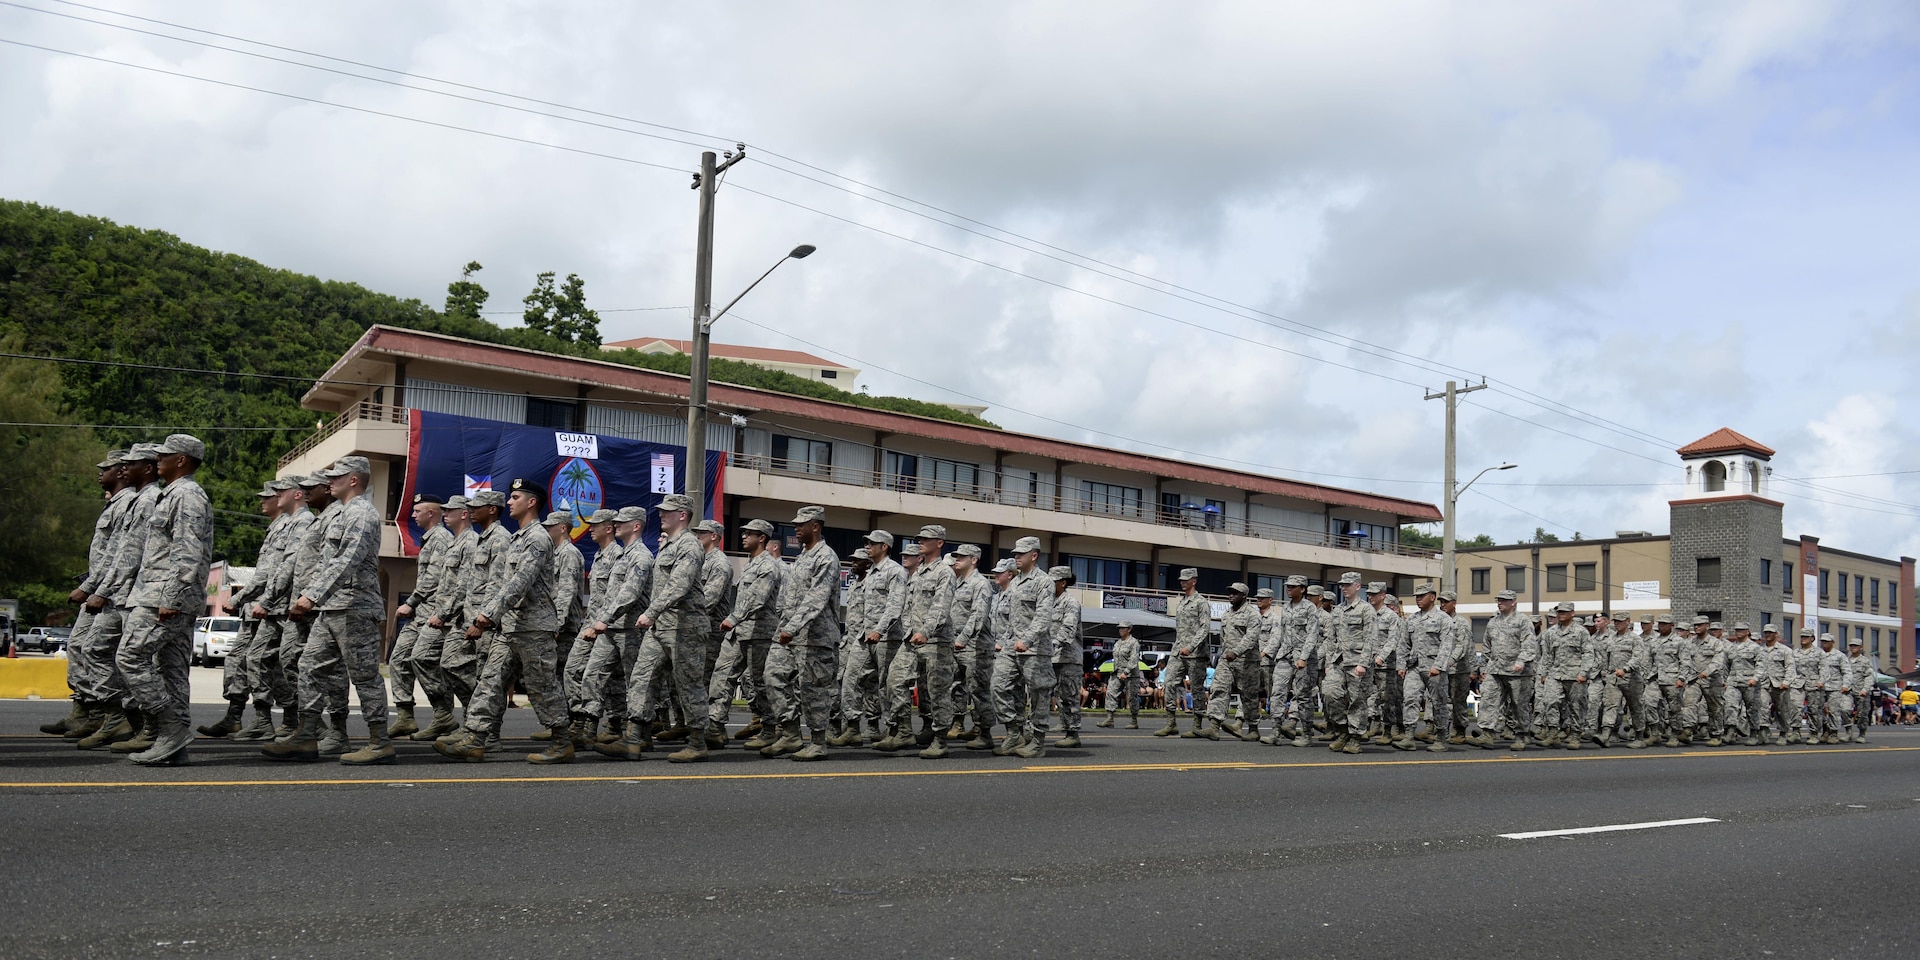 U.S. Airmen from the 36th Wing march in the 73rd Guam Liberation Day parade July 21, 2017, in Hagåtña, Guam. Liberation Day is celebrated to honor the U.S. armed forces who liberated the island from Japanese control in 1944. (U.S. Air Force photo by Airman 1st Class Gerald R. Willis)